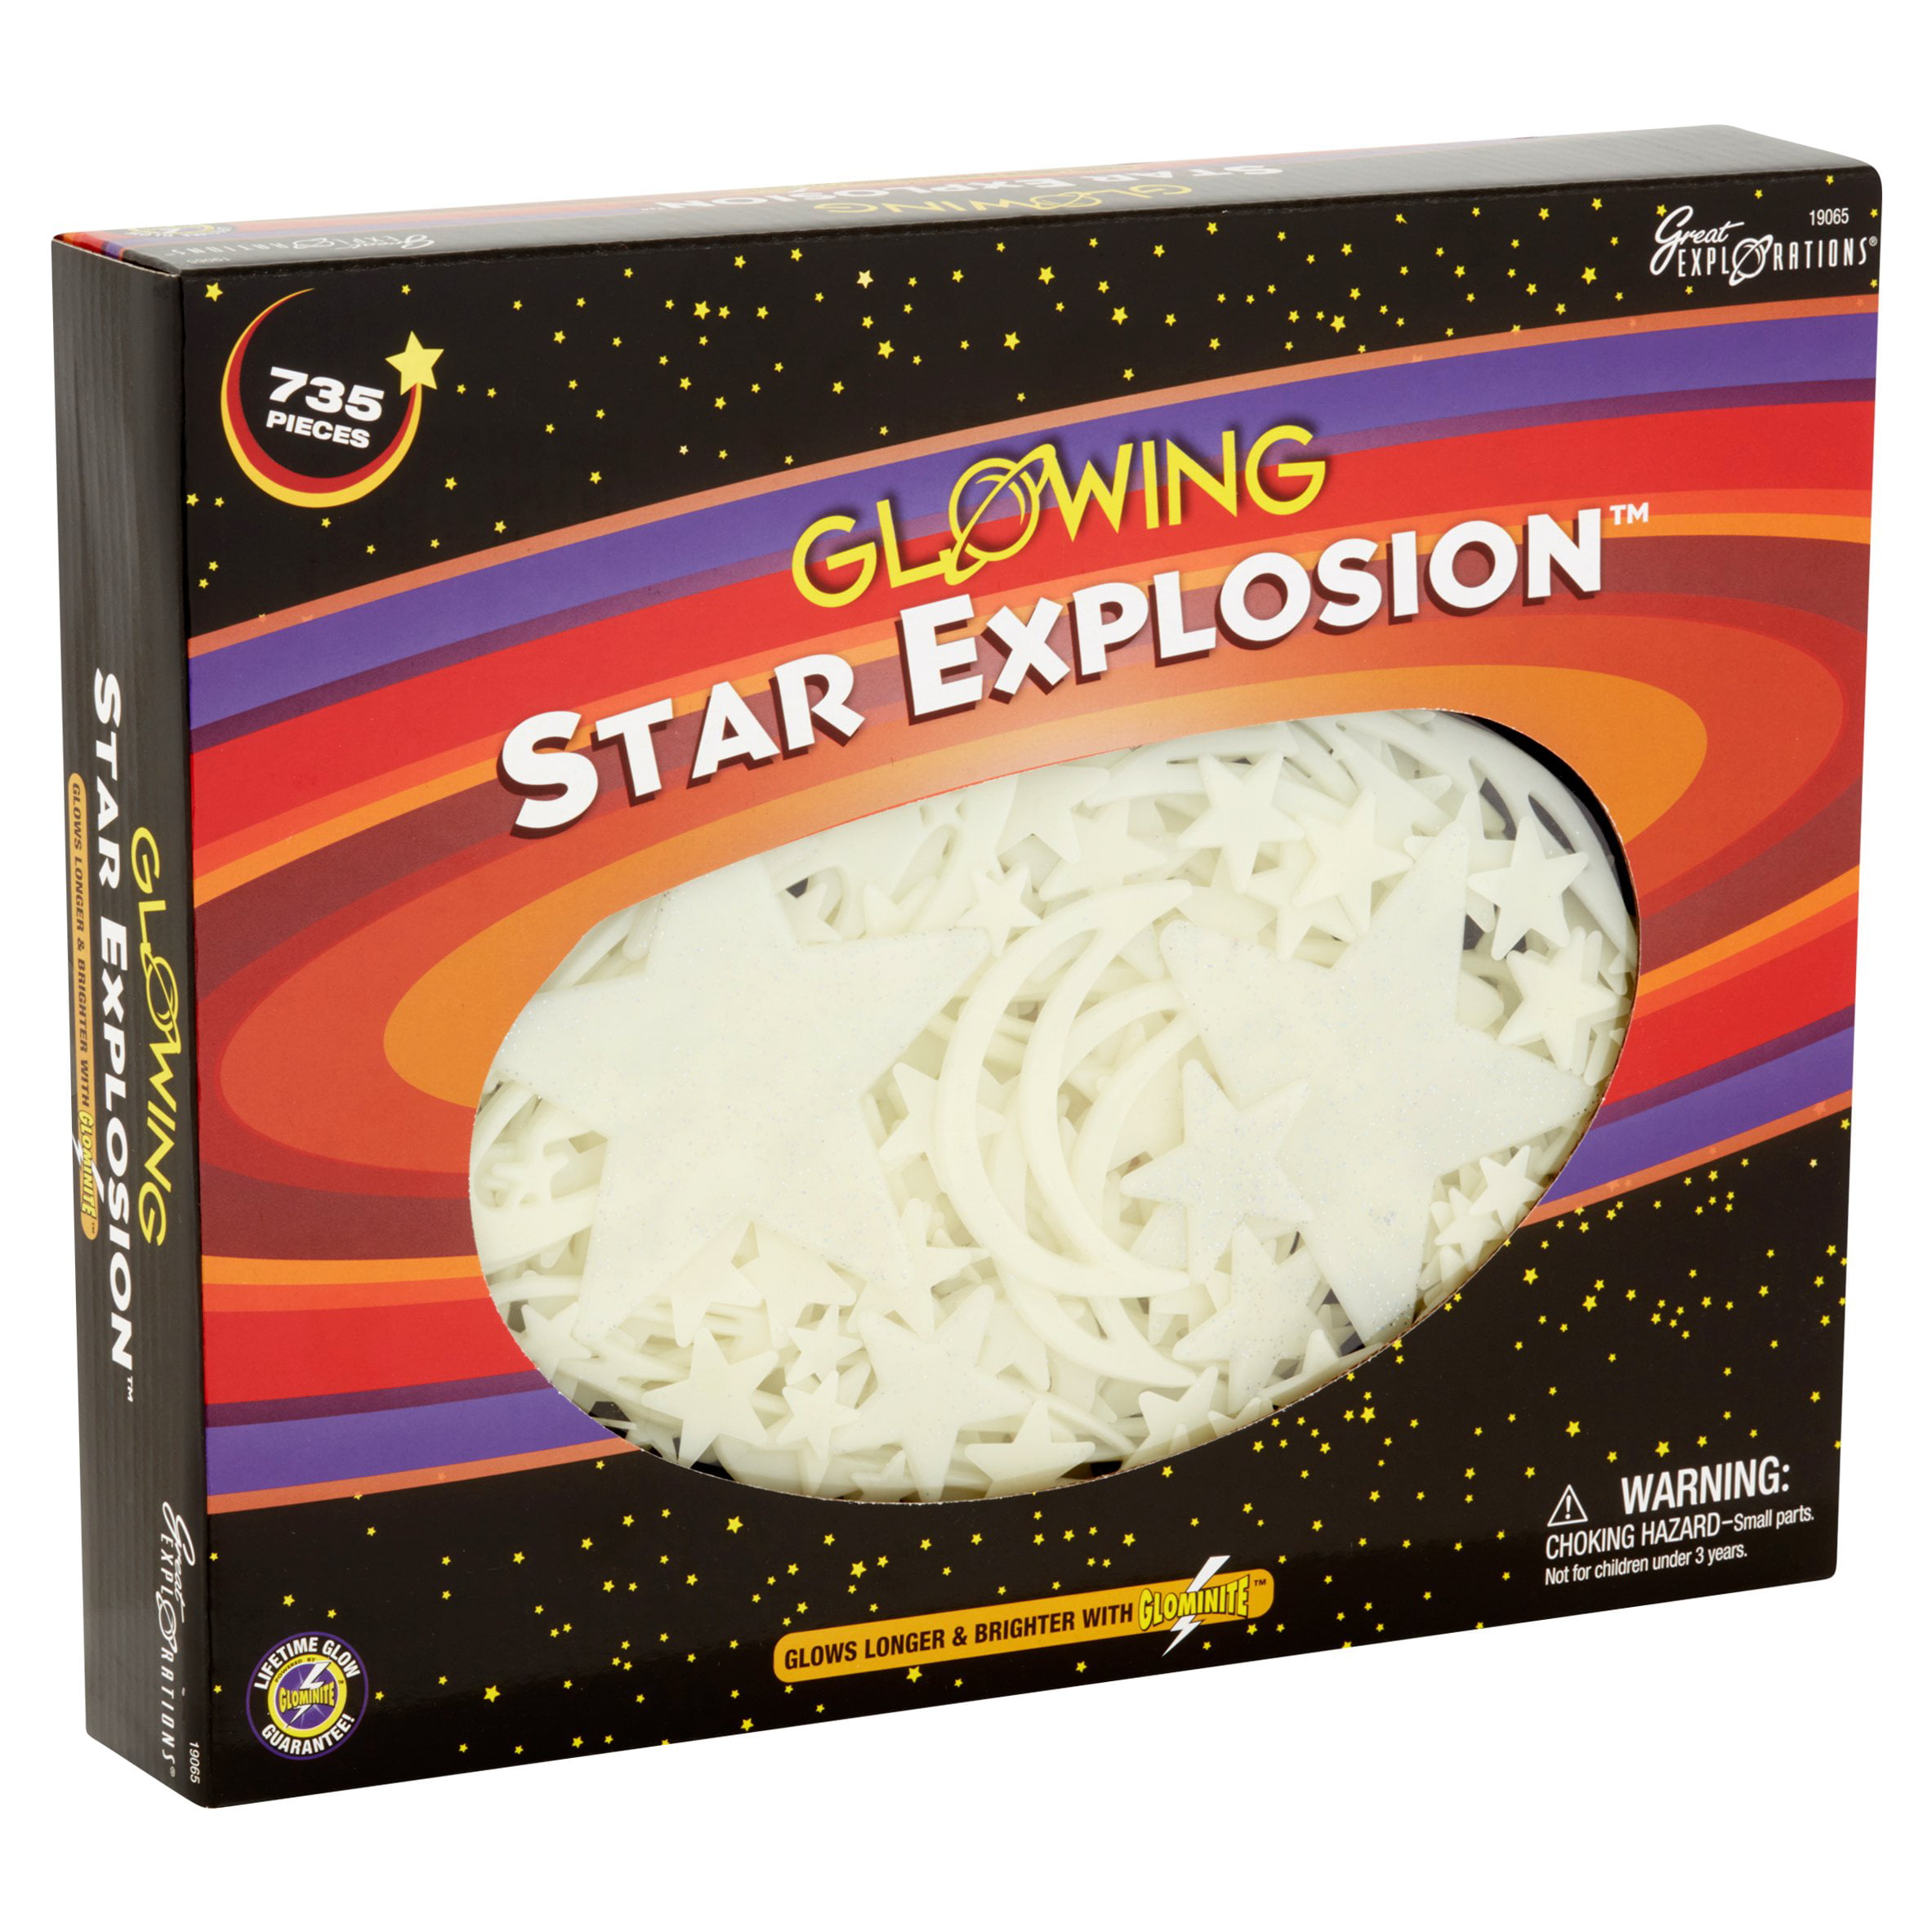 Great Explorations Glowing Star Explosion 735 Count